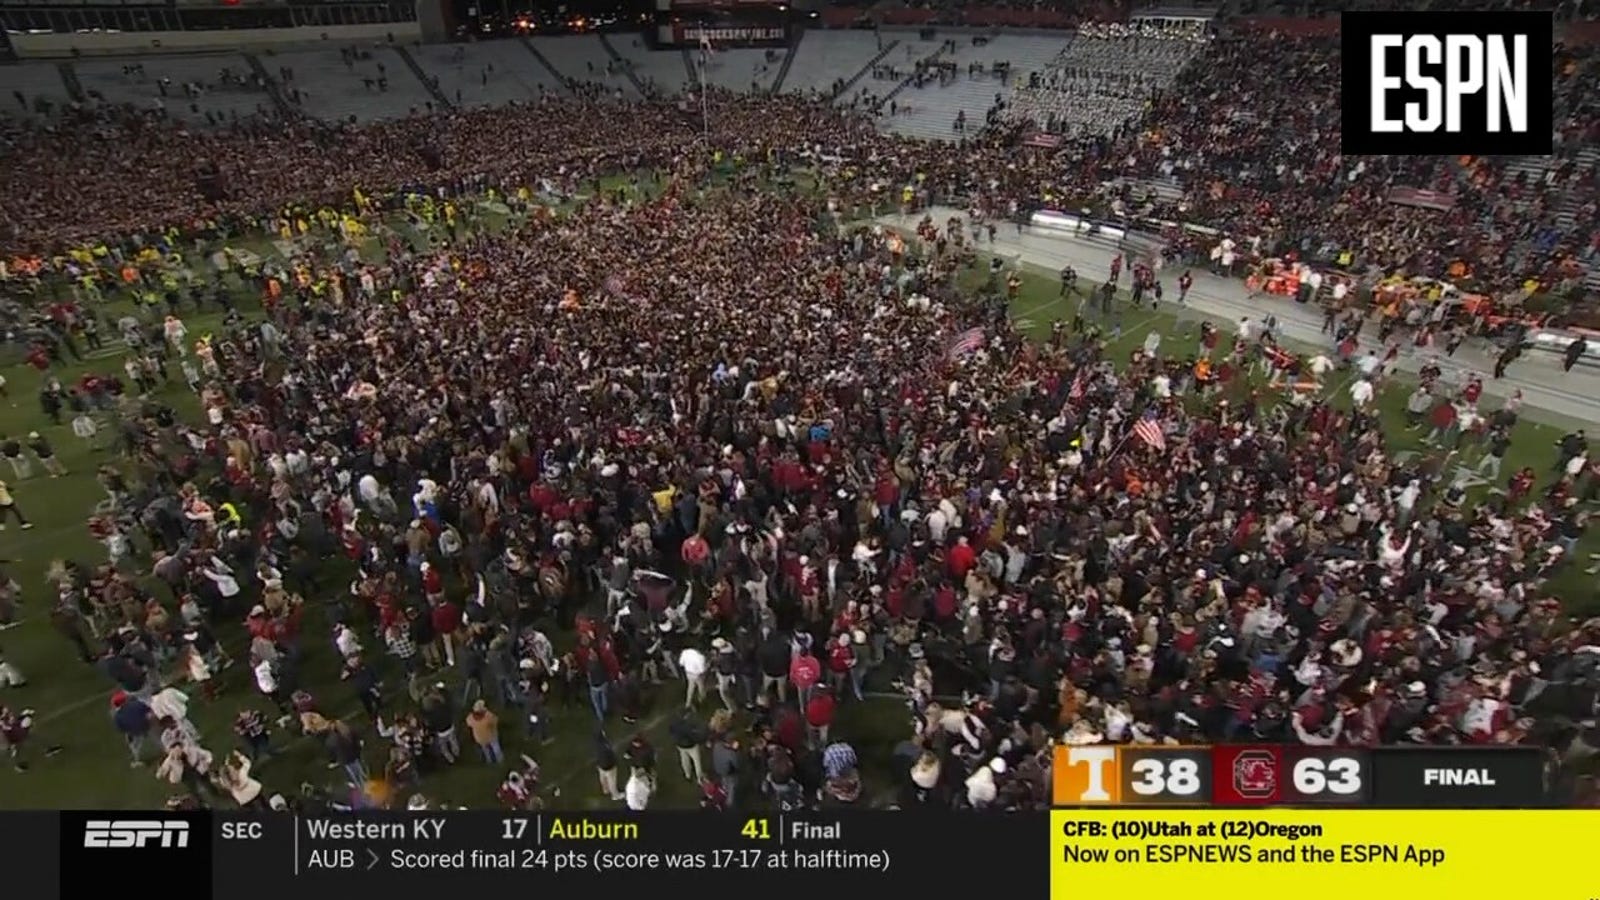 Fans storm the field after South Carolina's upset win against No. 5 Tennessee